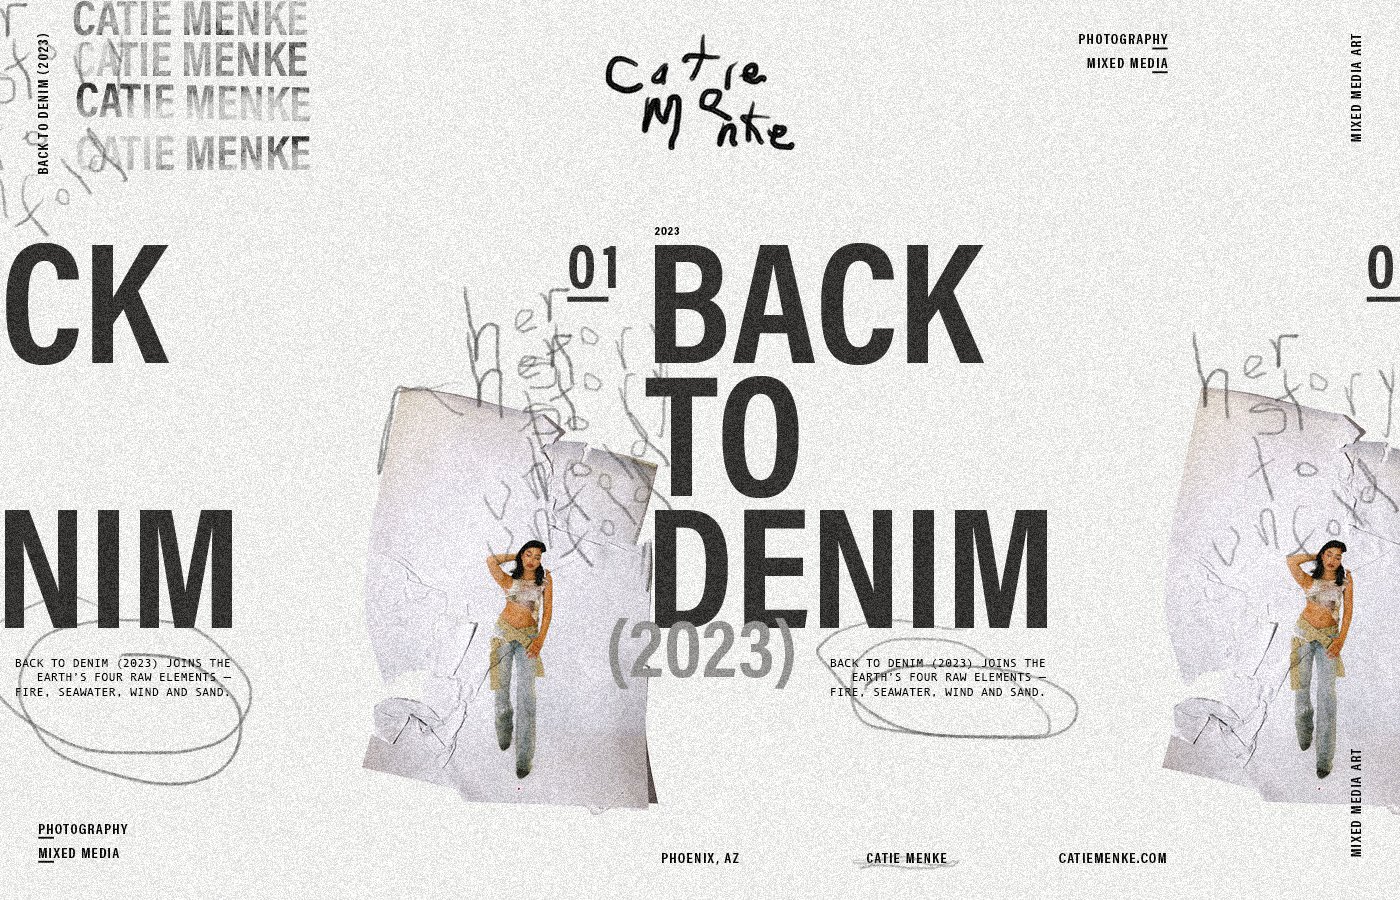  Back to Denim (2023) by Catie Menke, Phoenix, AZ, joins the earth’s four raw elements - fire seawater, wind and sand. 